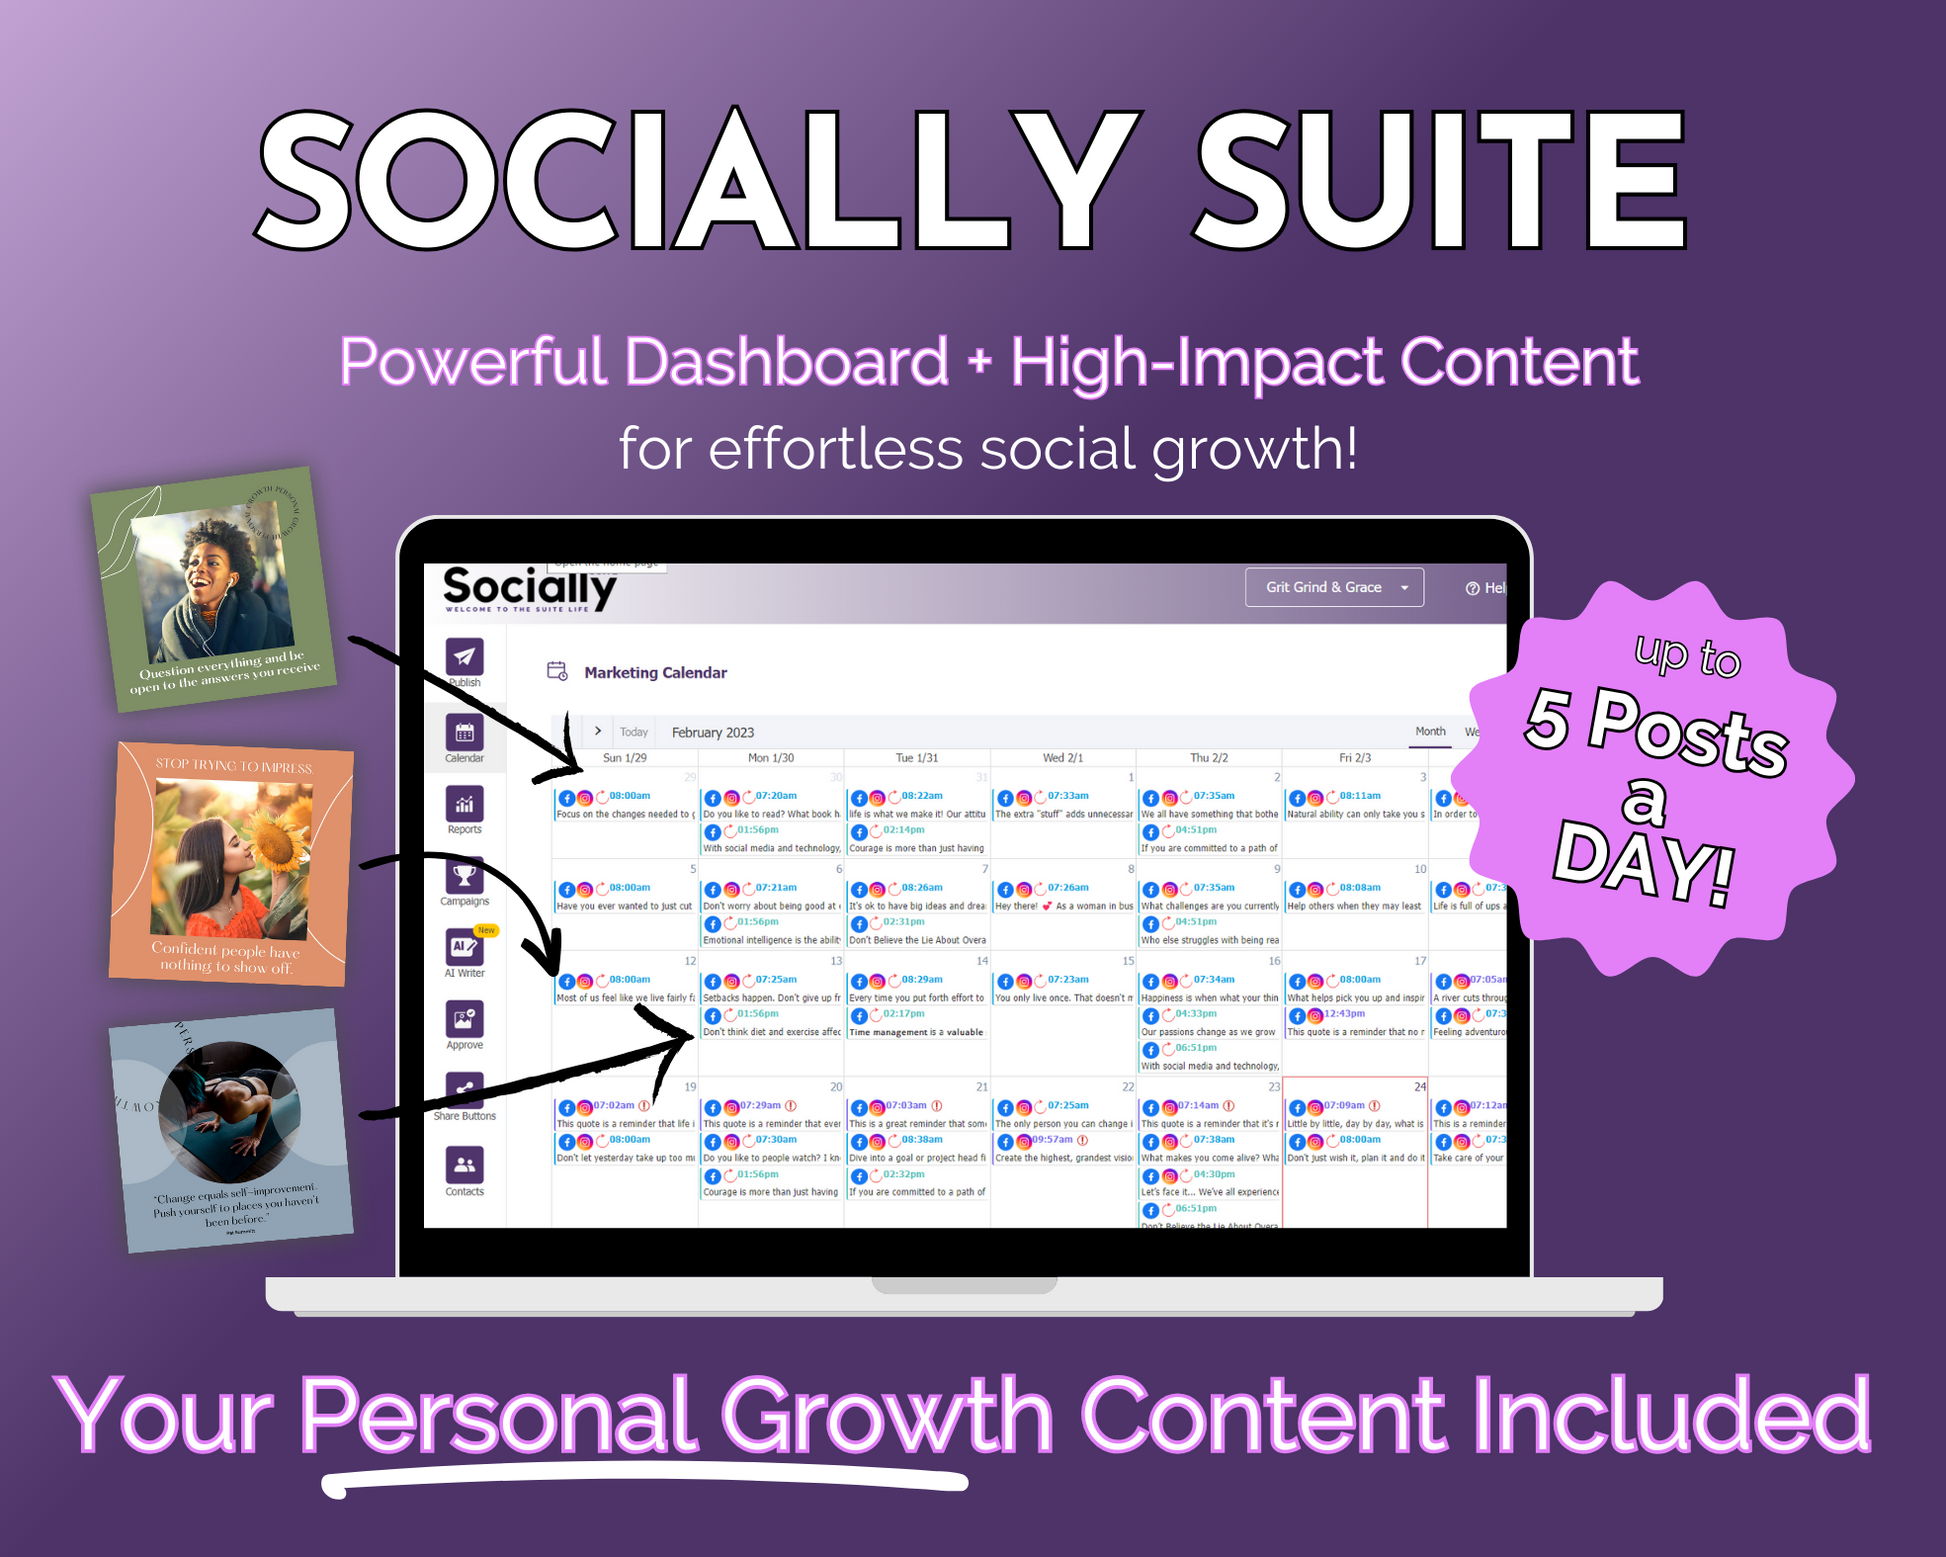 A Get Socially Inclined laptop for content management with integrated social media marketing capabilities, called the Socially Suite Membership.